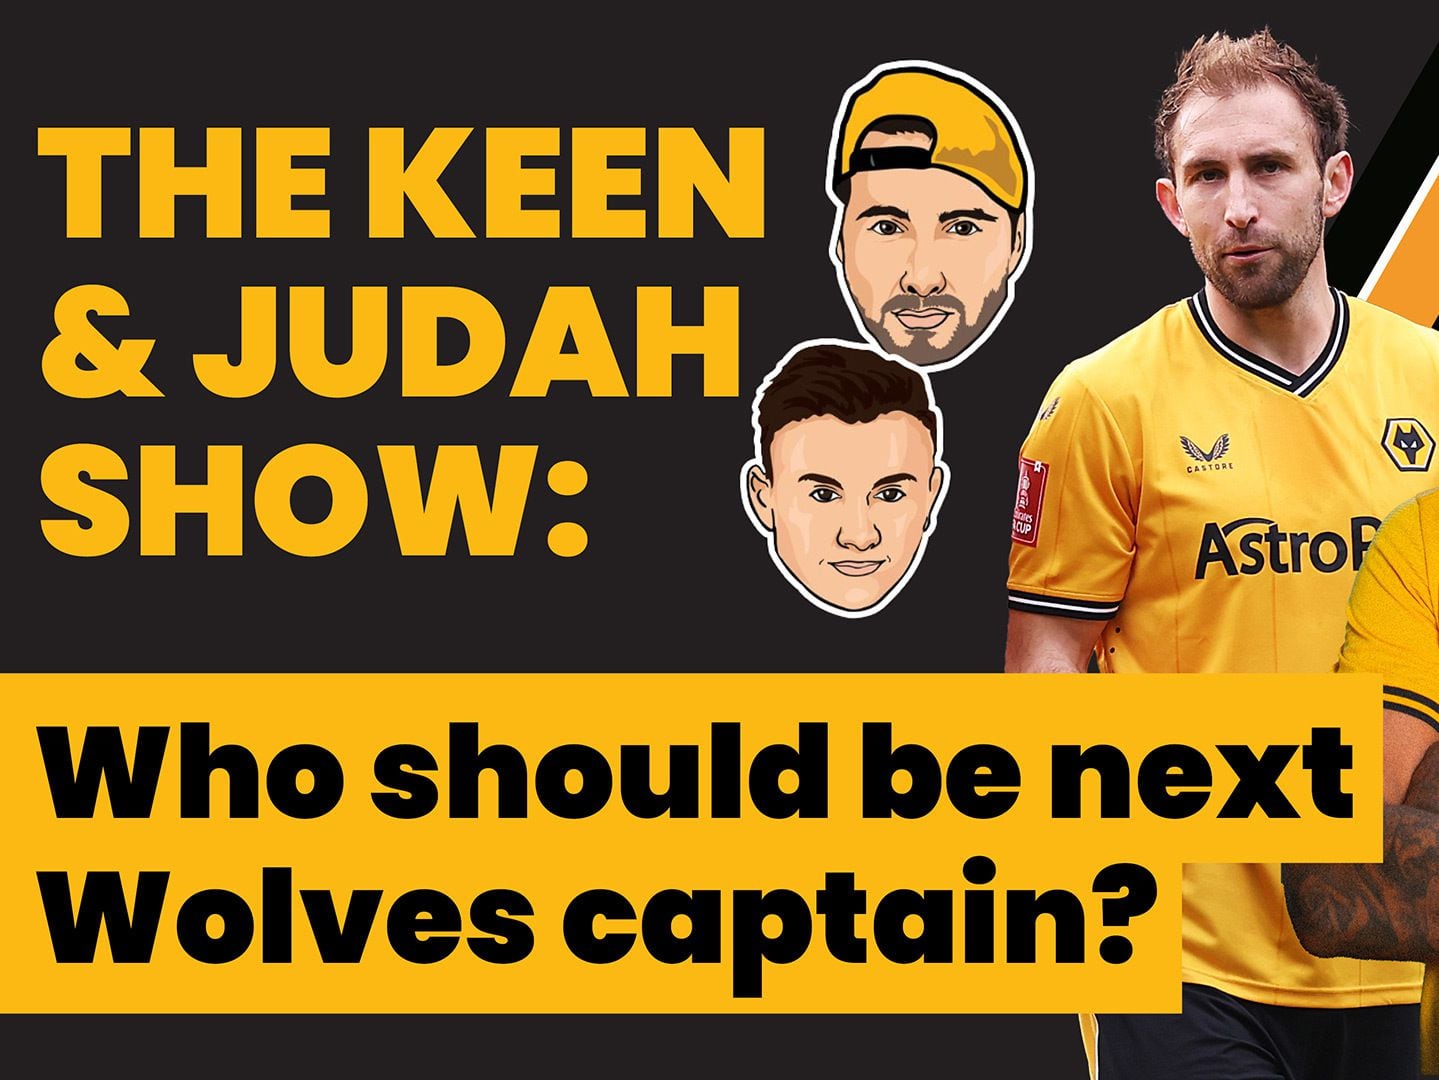 The Keen & Judah Show: Who should be next Wolves captain?